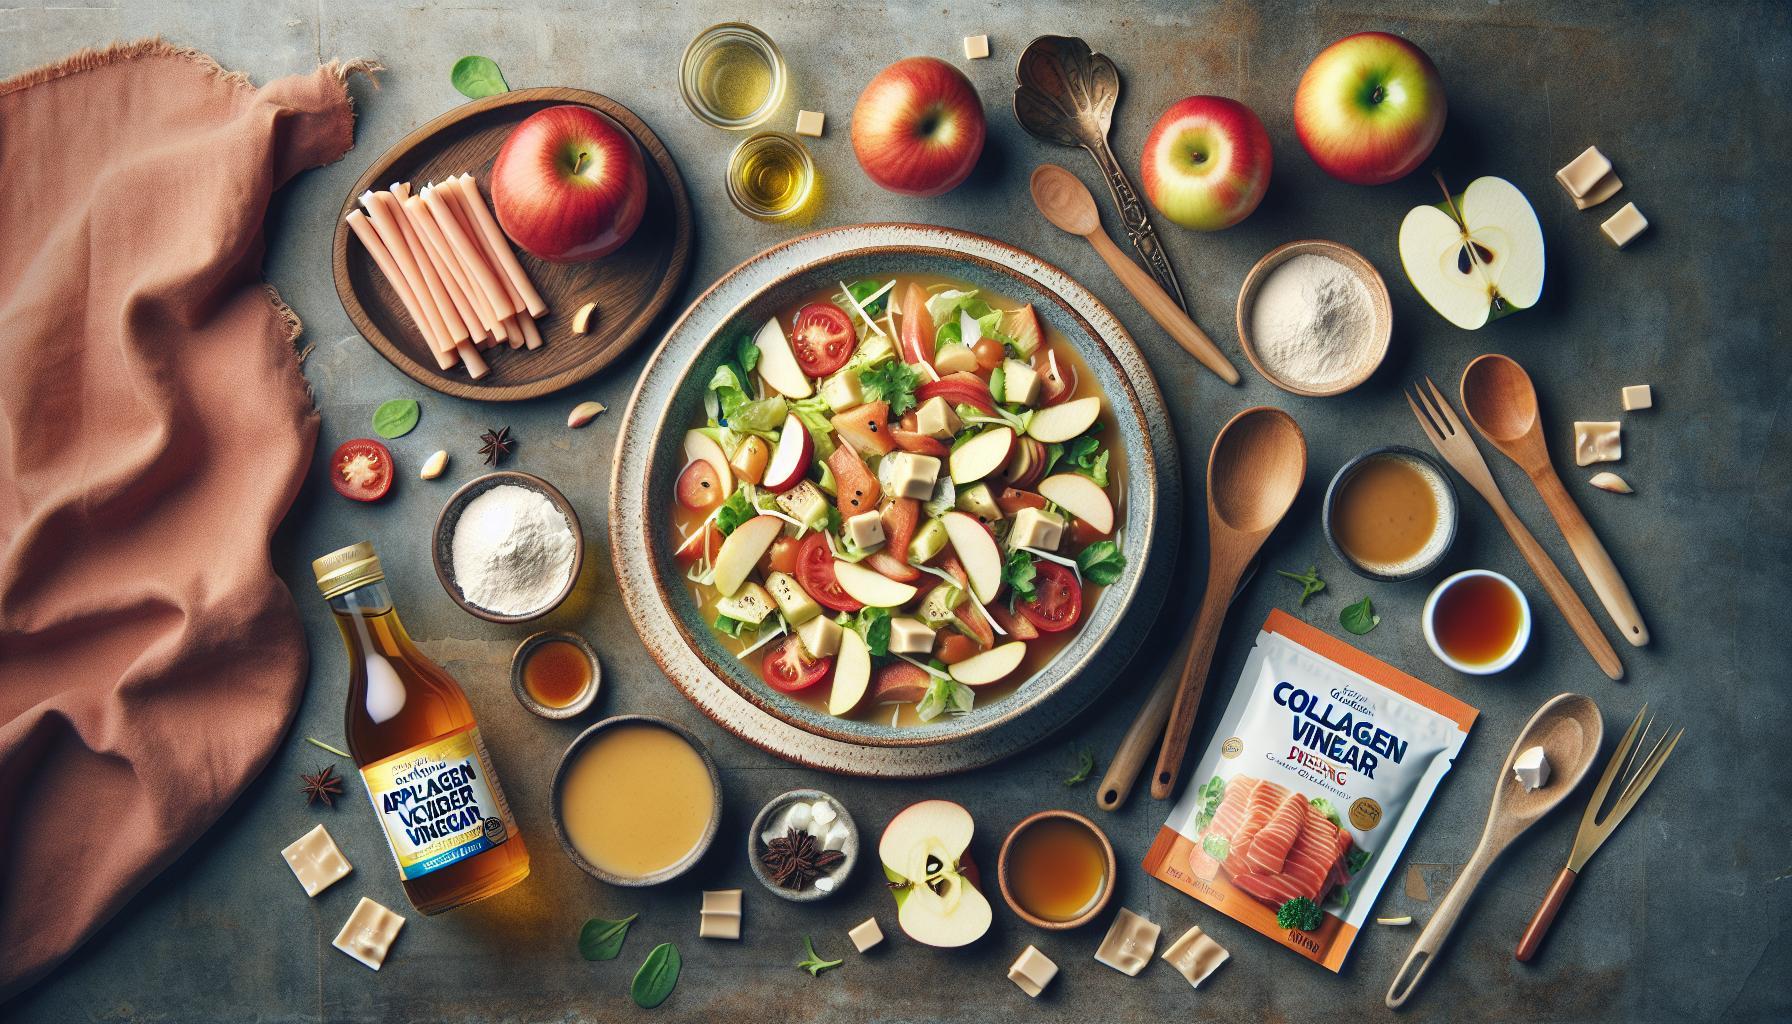 Boost Your Health with This Tasty Collagen-Infused Apple Cider Vinegar Dressing Recipe